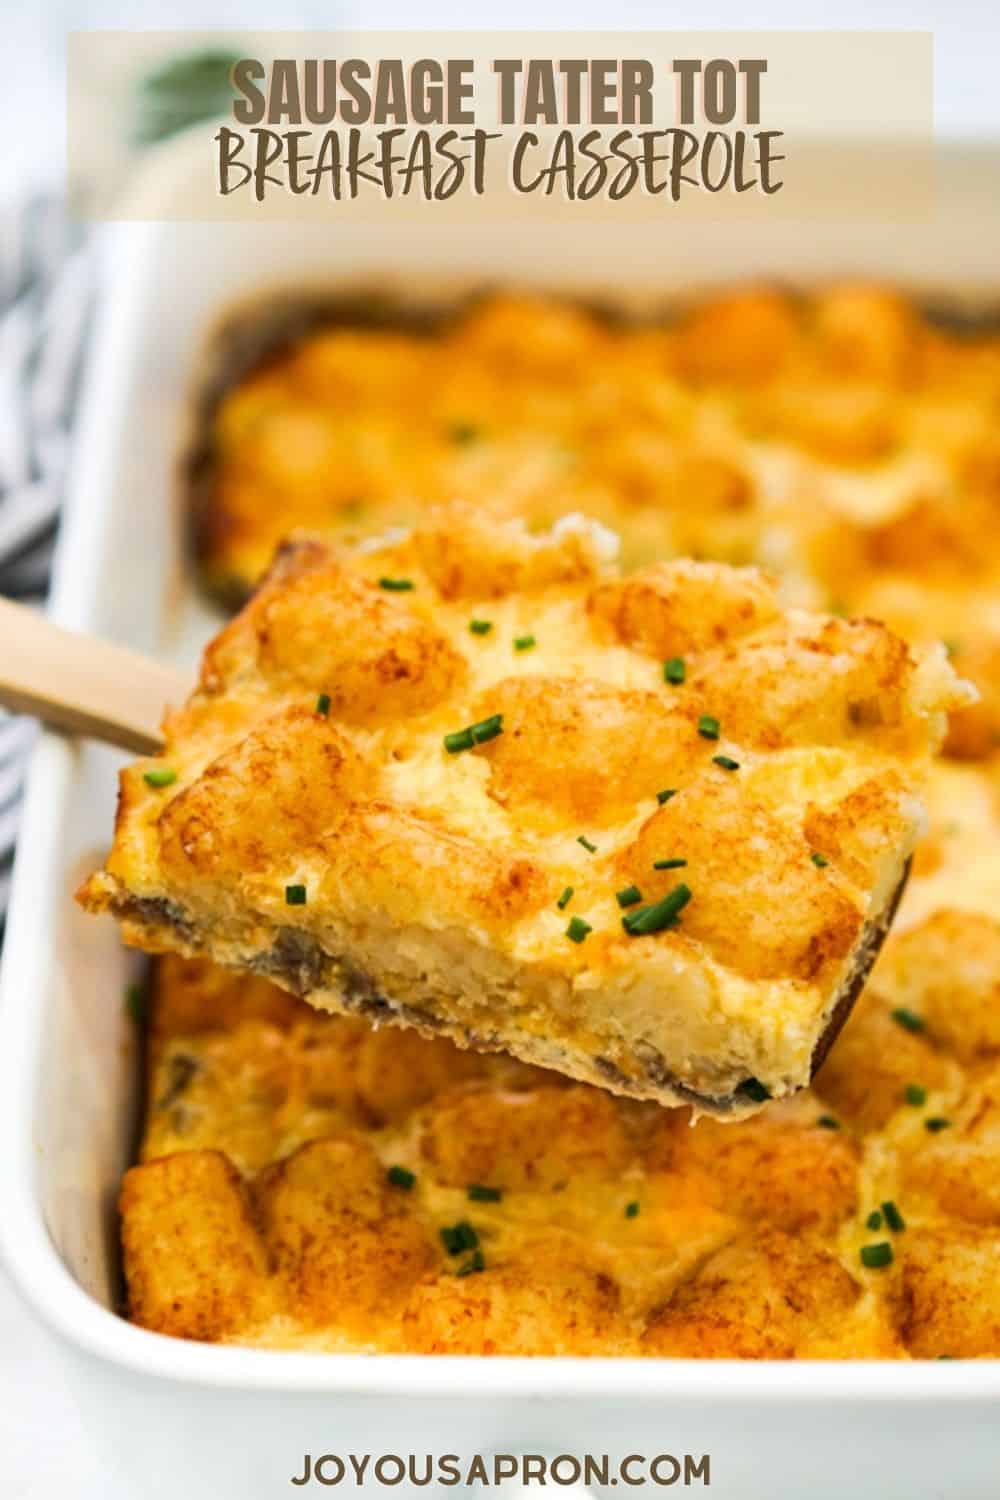 Sausage Tater Tot Breakfast Casserole - Easy and yummy brunch casserole! Ground breakfast sausage, eggs, tater tot potatoes and cheese oven baked until perfection. Great for the holidays! via @joyousapron